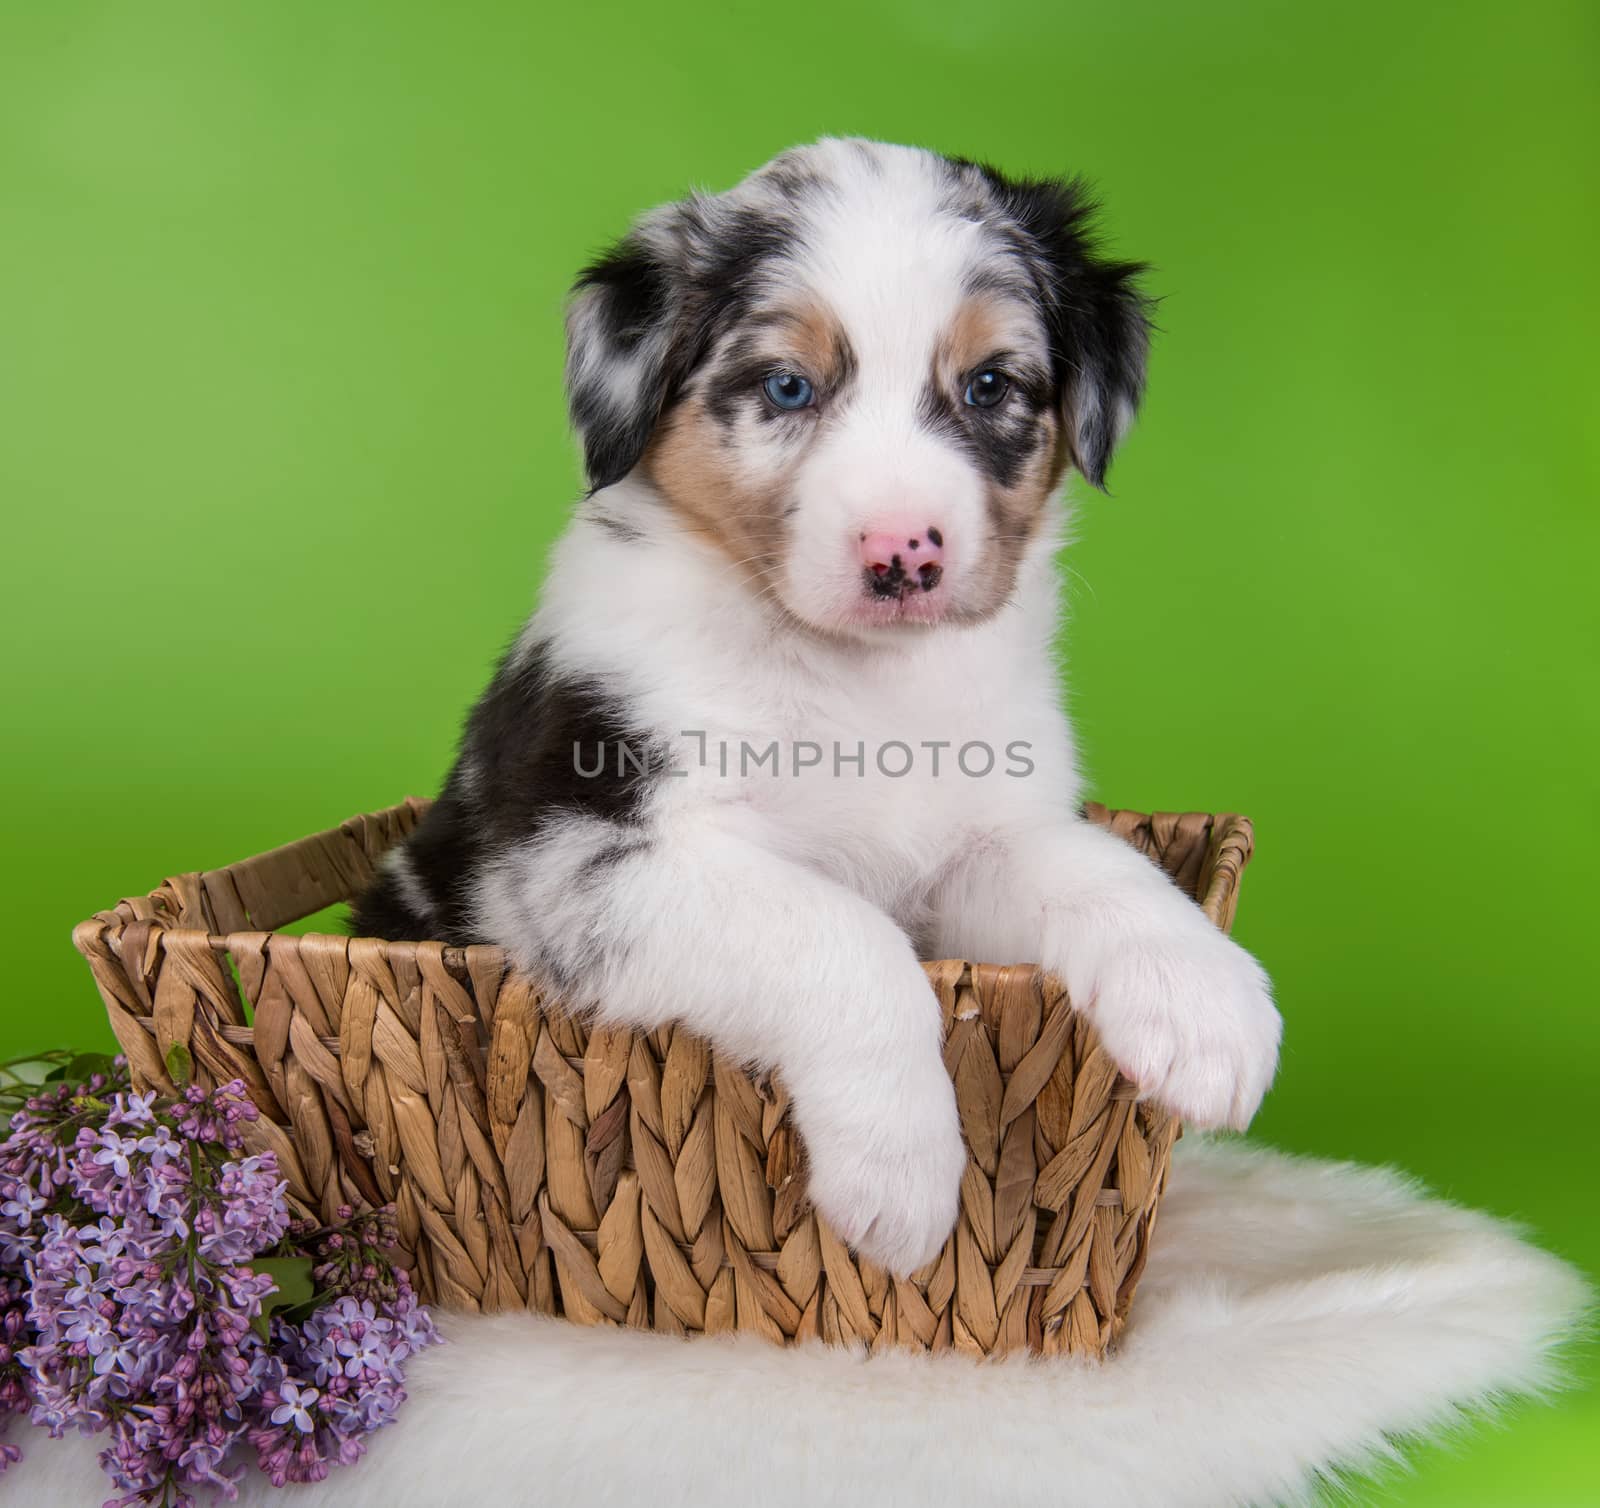 Red Merle Australian Shepherd puppy dog portrait with copper points with blue eyes, six weeks old, sitting inside a basket with lilac flowers in front of green background.